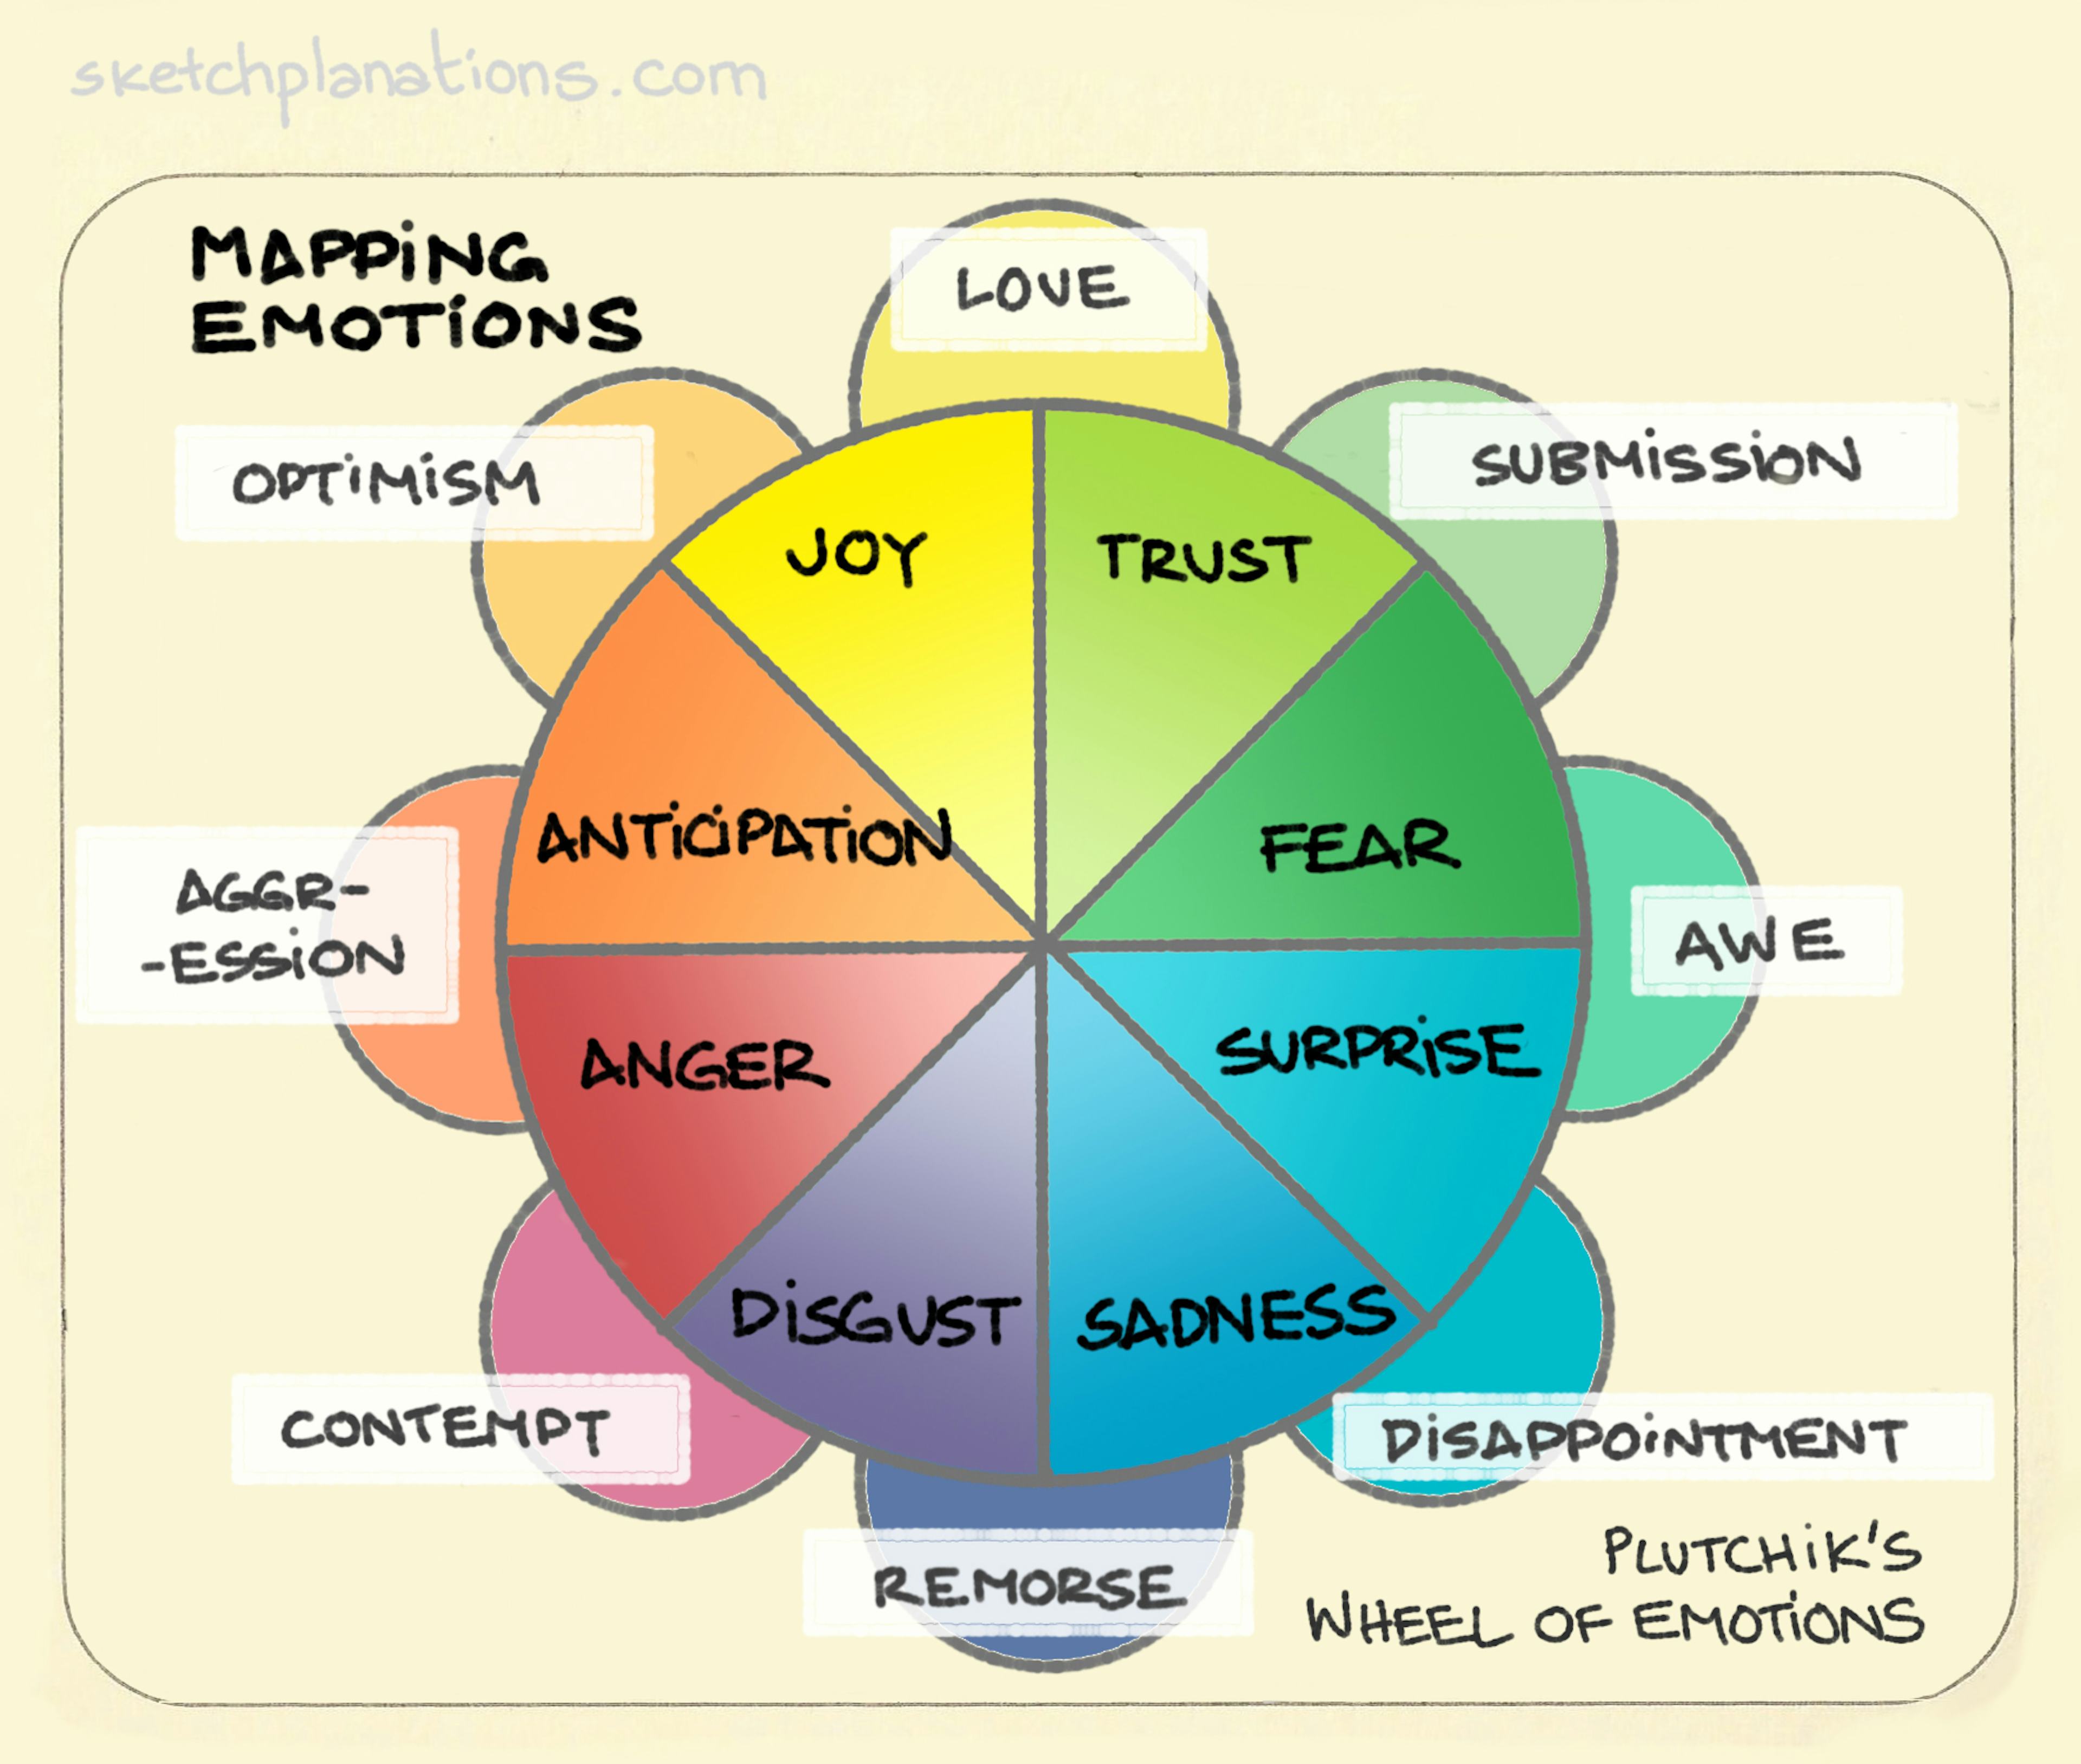 Plutchik's Wheel of Emotions: a colourful wheel showing how emotions mix